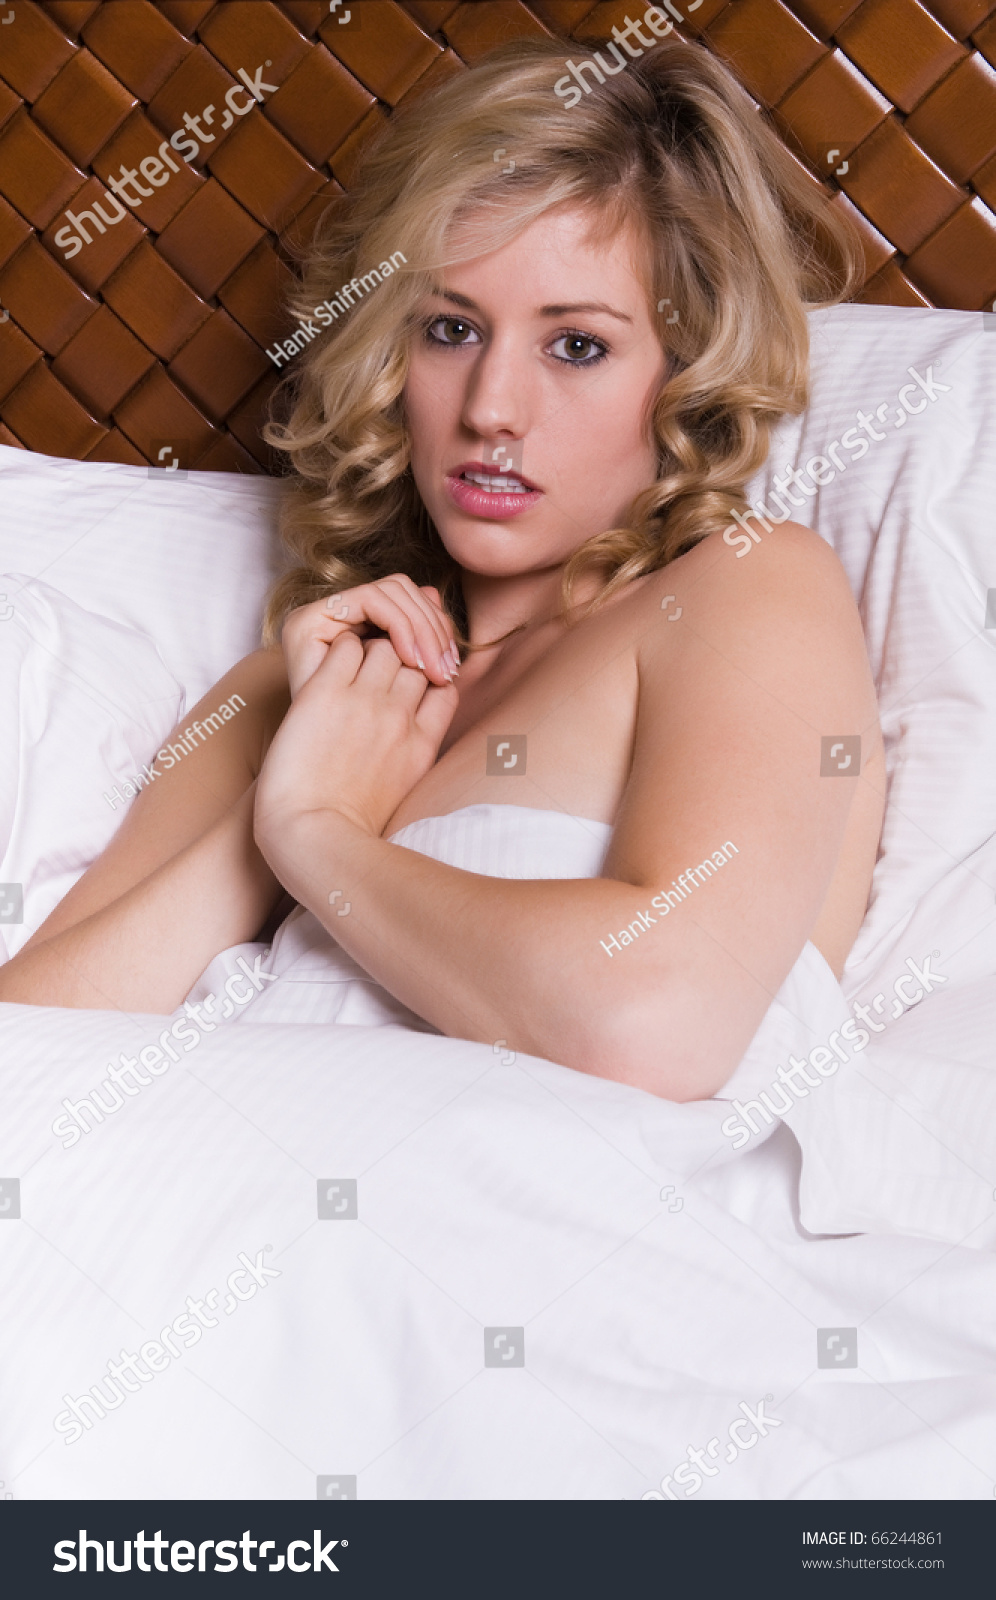 Nude Blonde On Bed